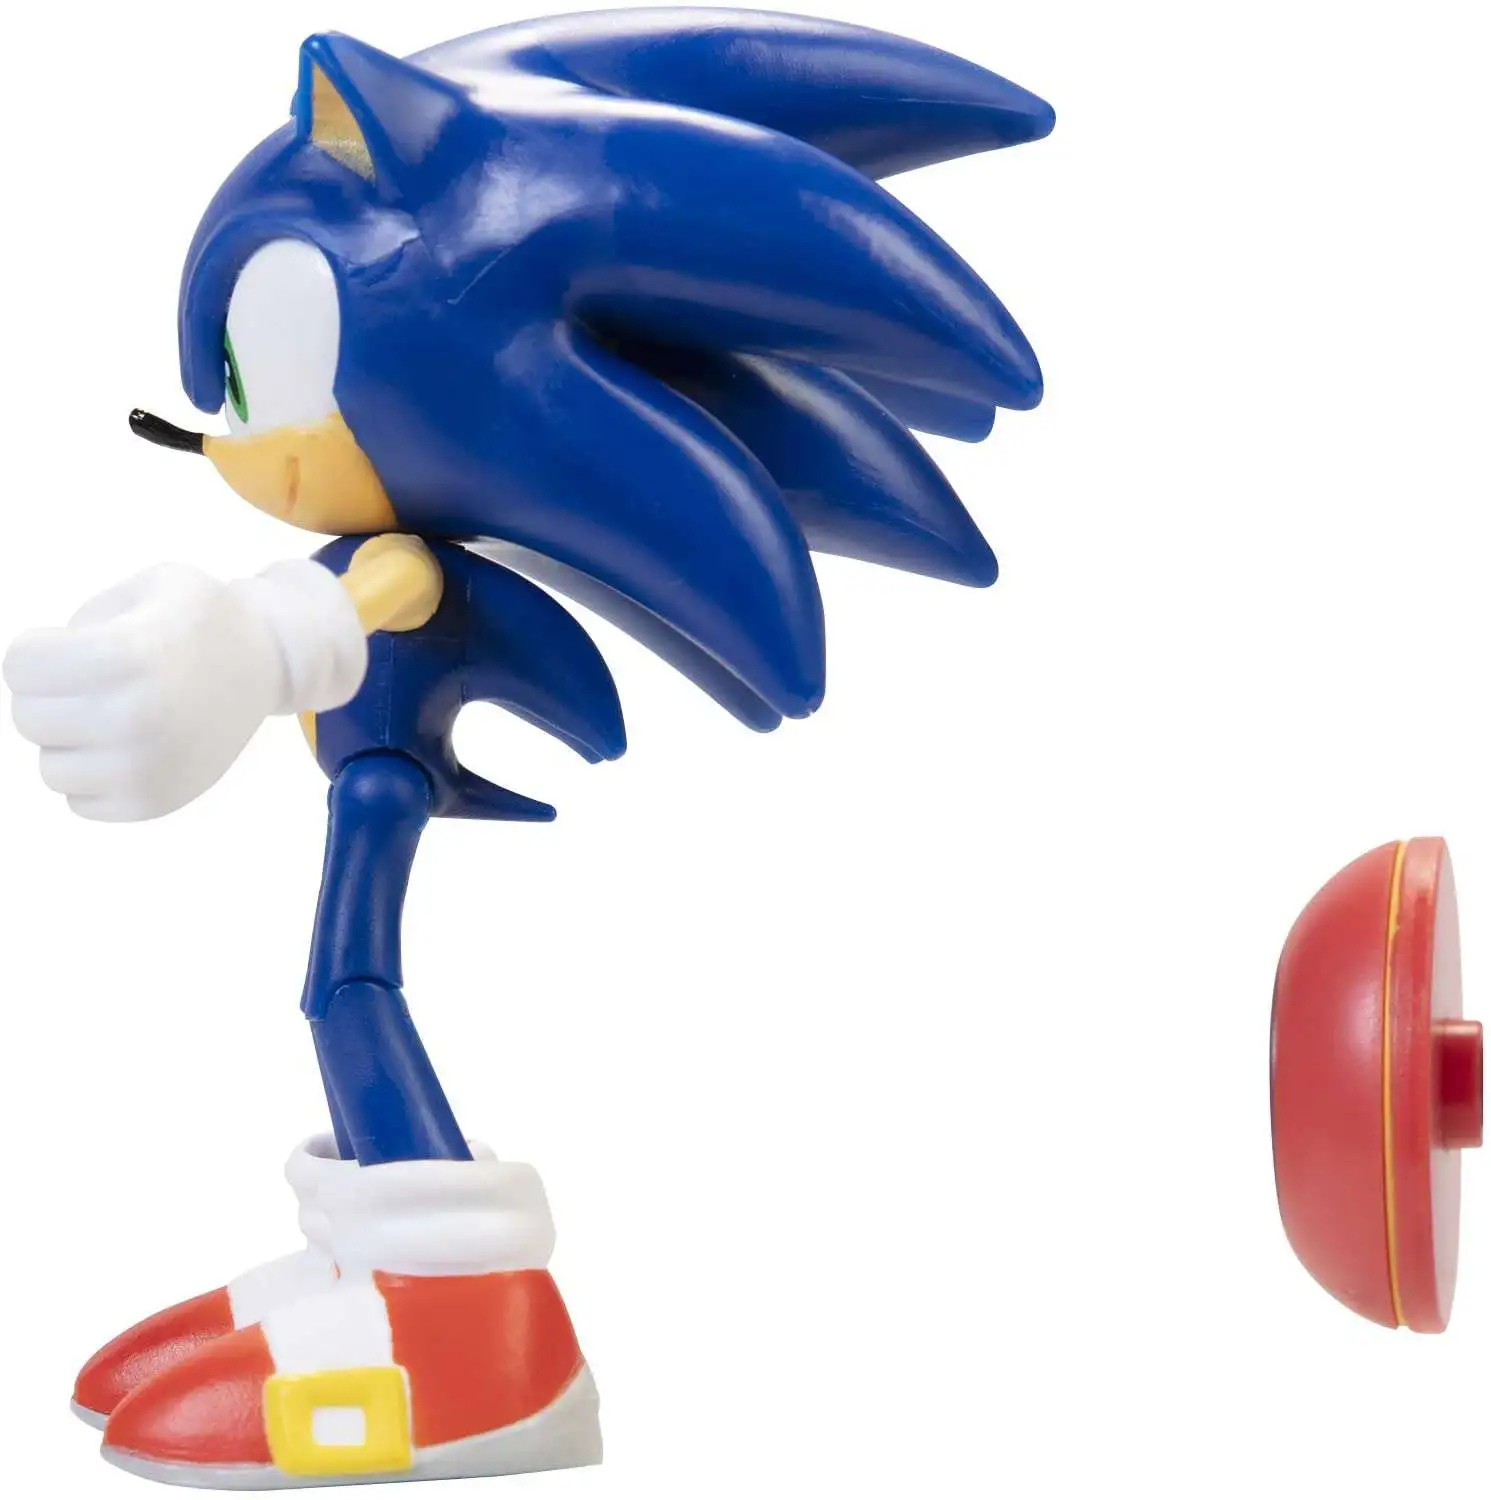 Sonic the Hedgehog Green Hill Zone Playset – Toys Onestar